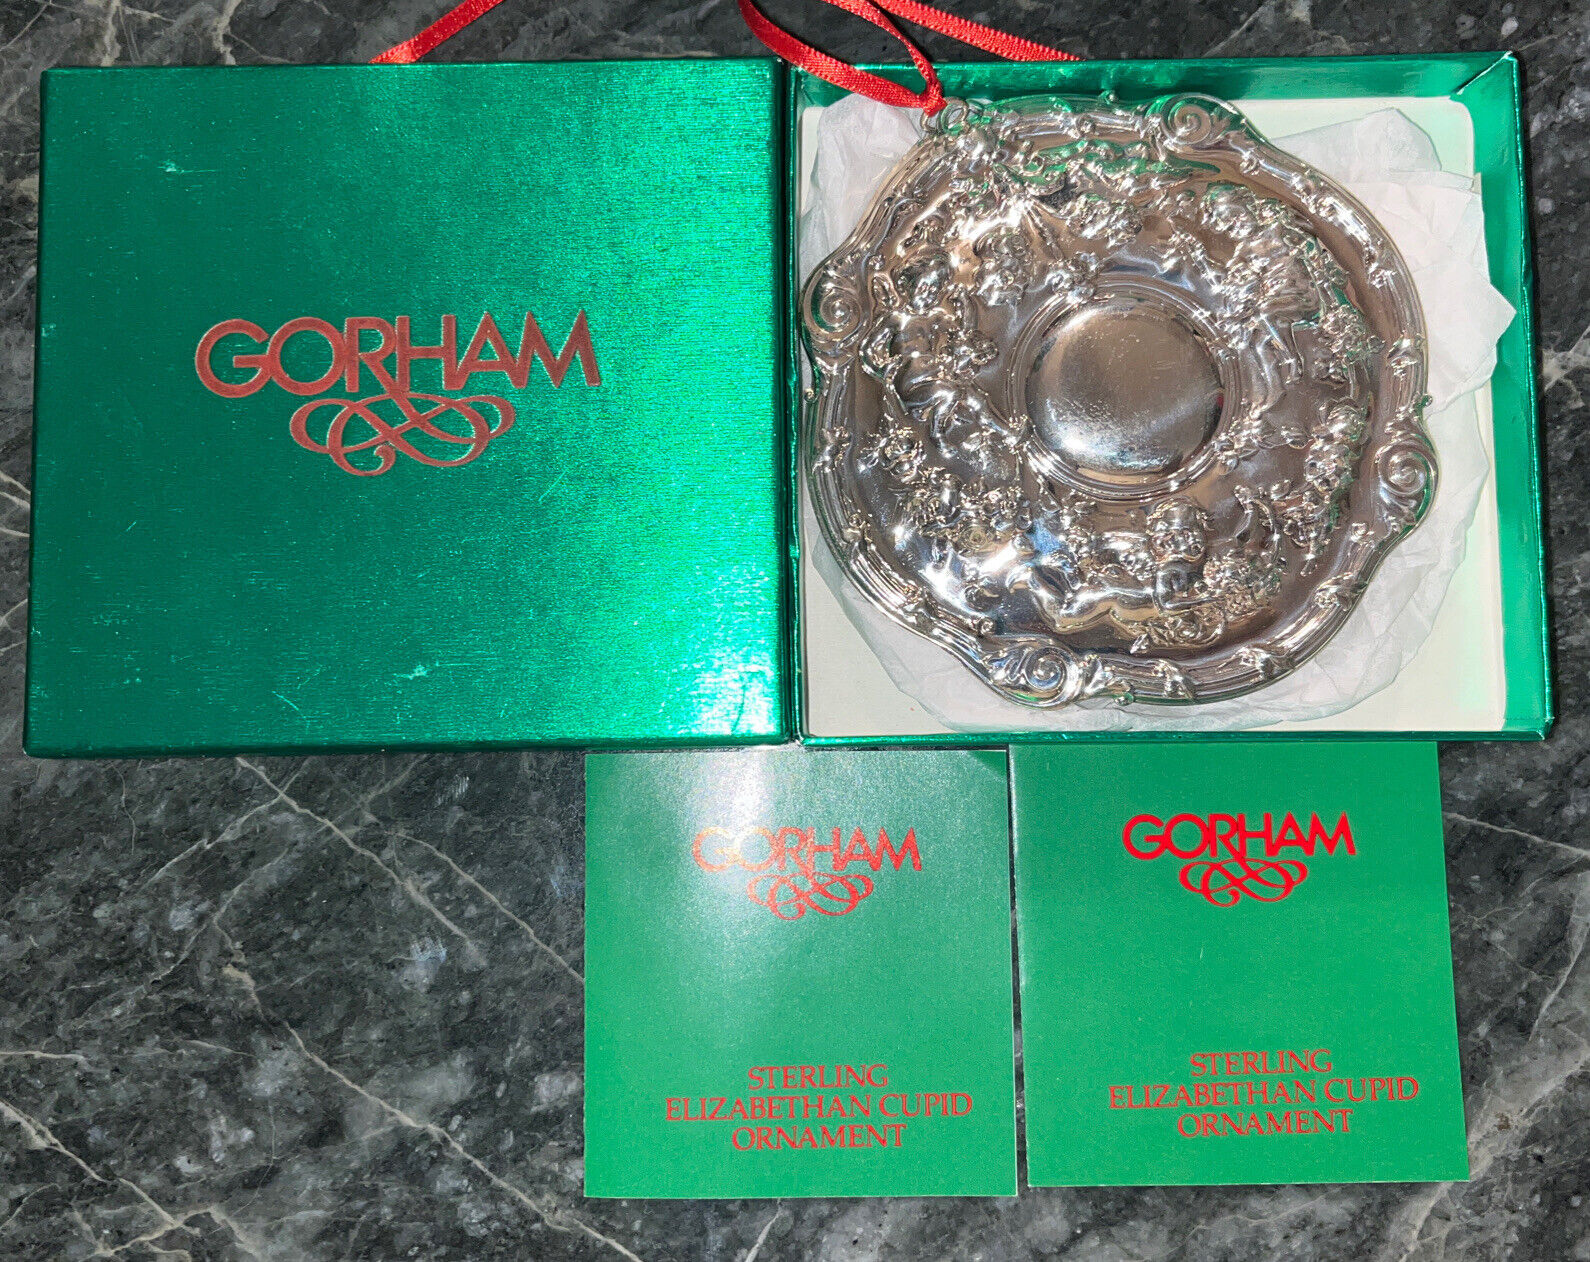 GORHAM Elizabethan CUPID Sterling Silver Ornament 1990 Archive Collection